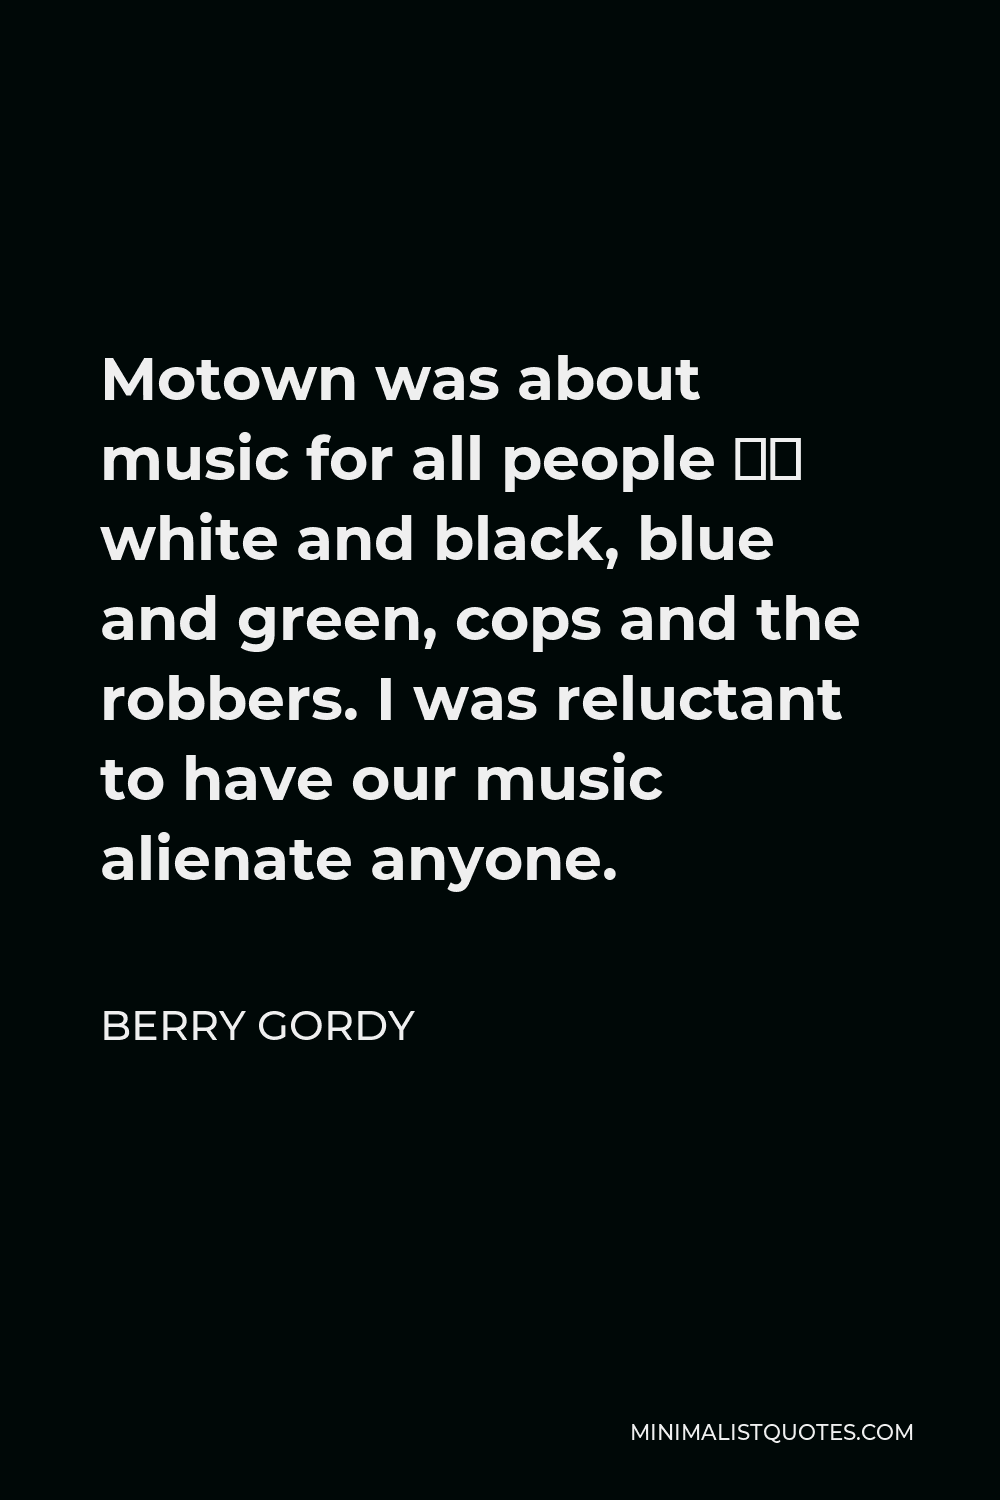 Berry Gordy Quote - Motown was about music for all people – white and black, blue and green, cops and the robbers. I was reluctant to have our music alienate anyone.